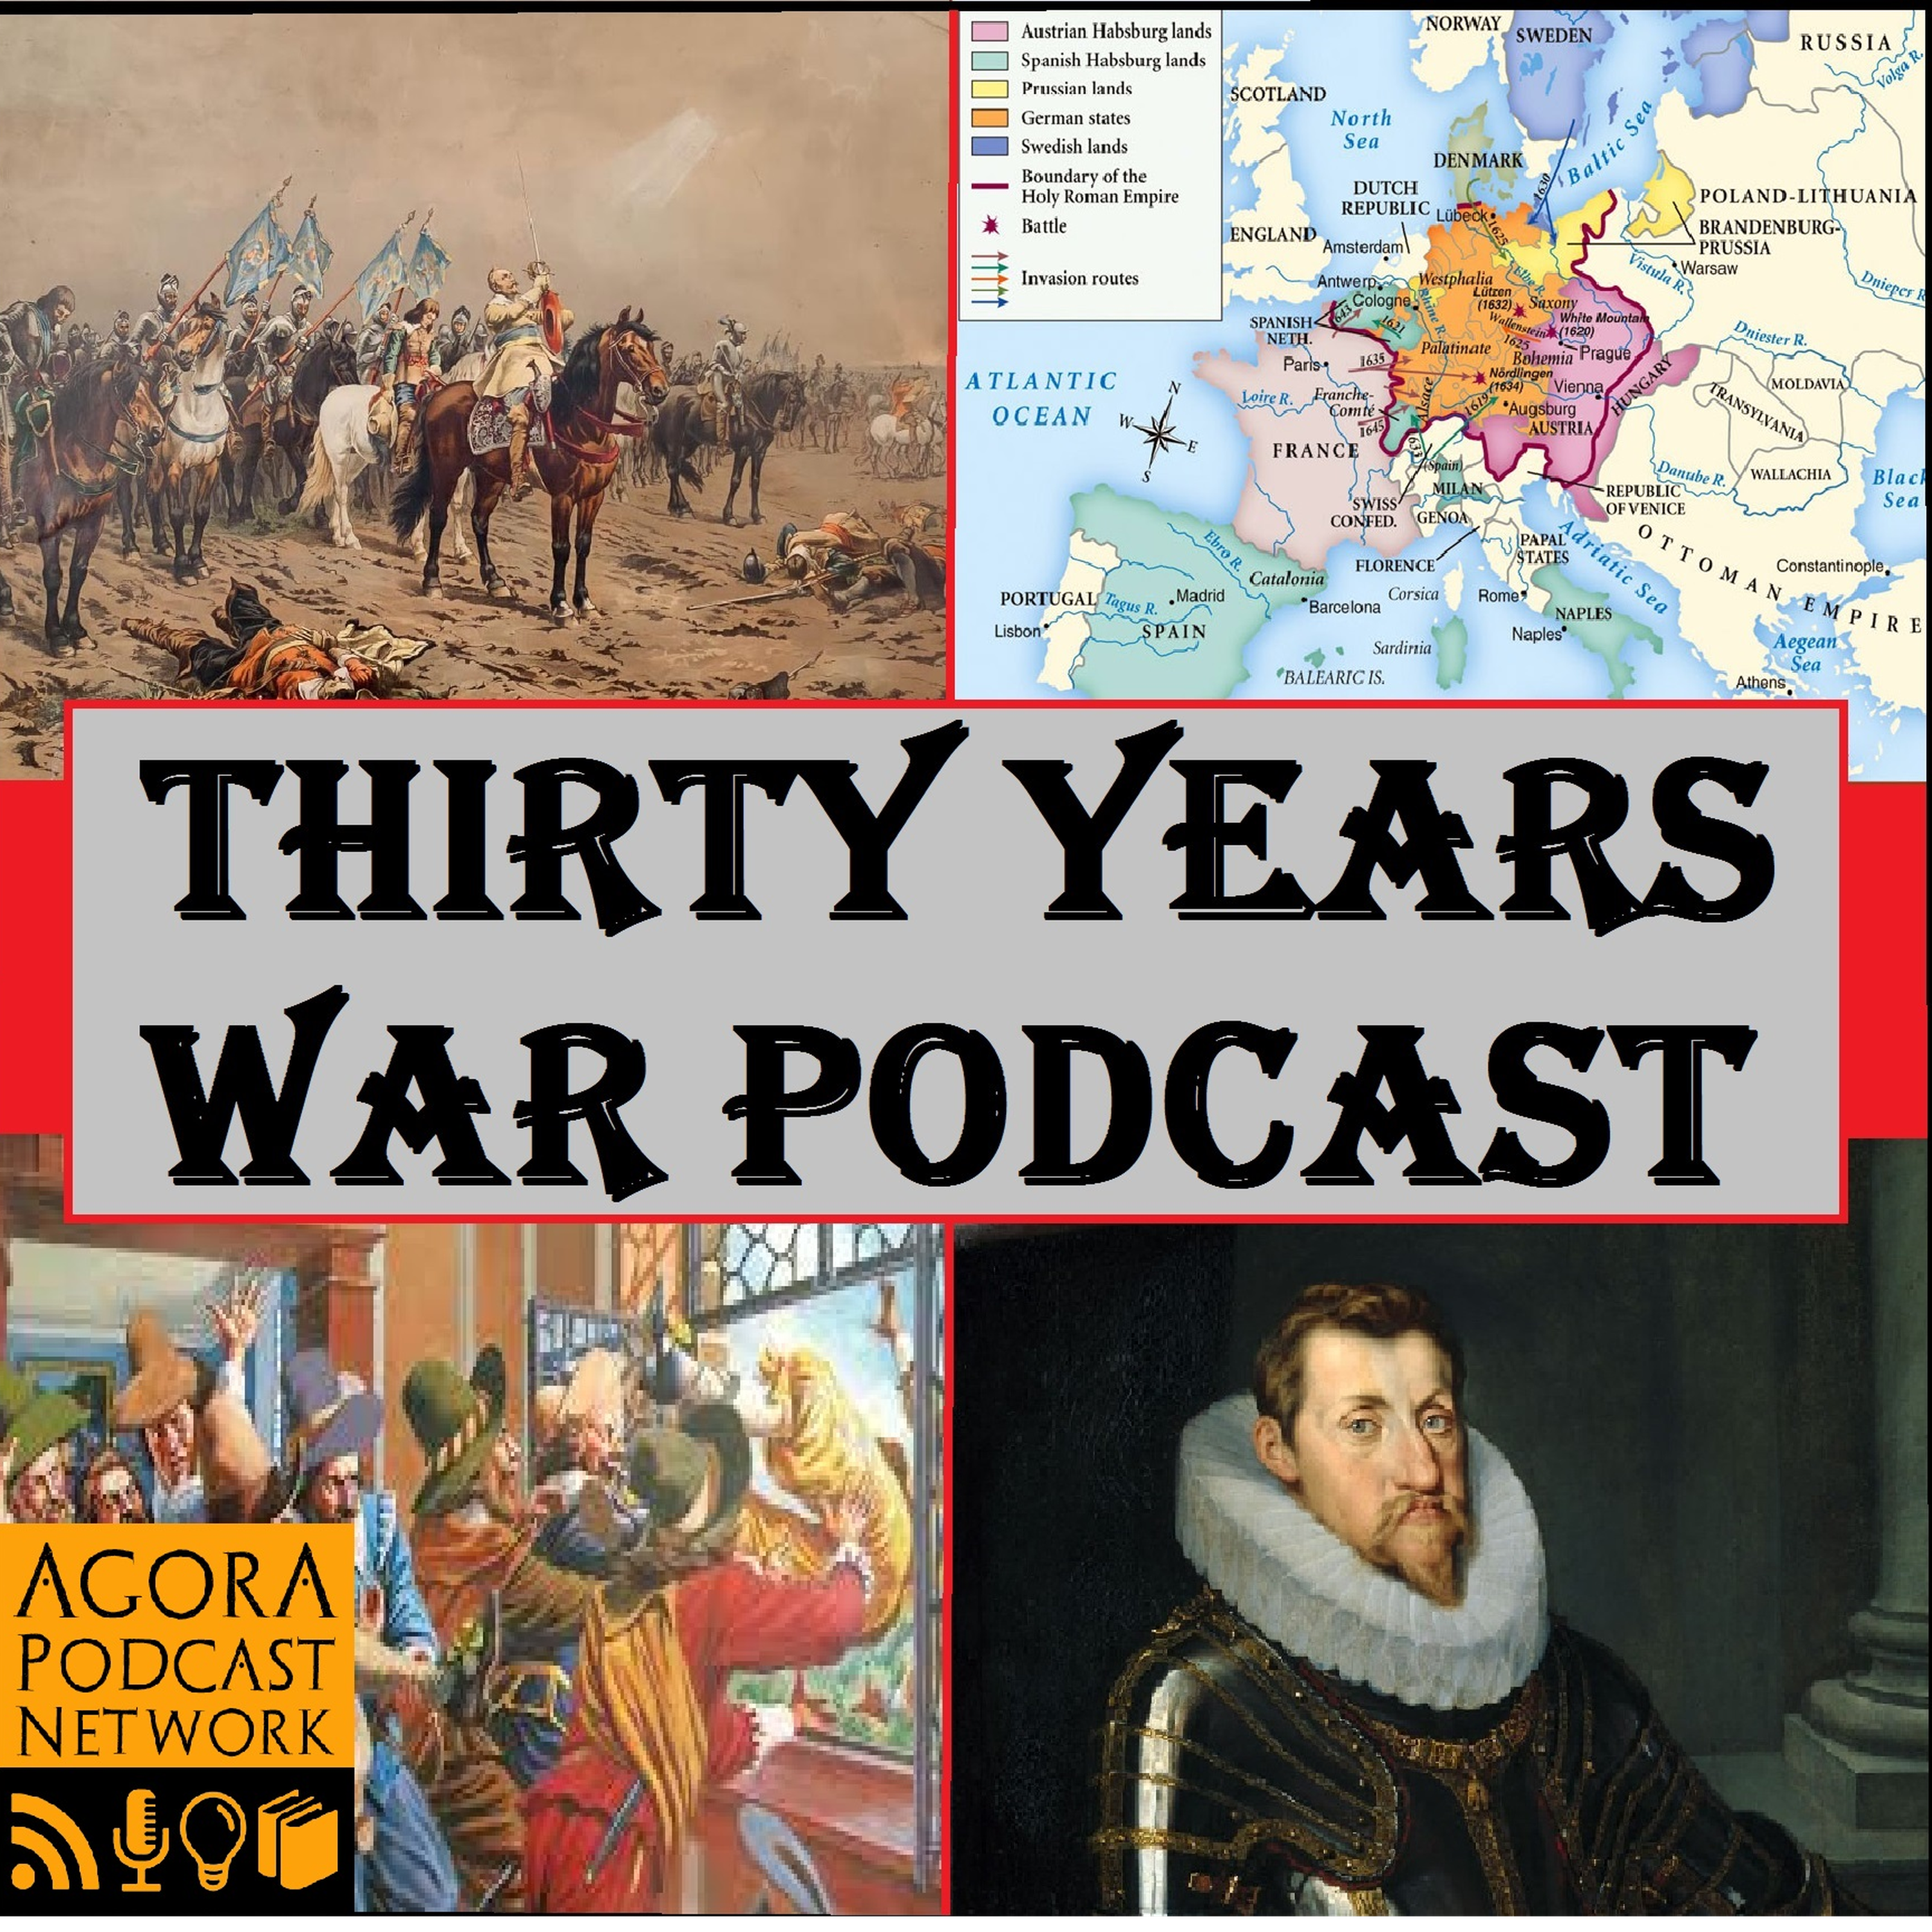 30YearsWar #32: The Rise and Fall of the Hague Alliance